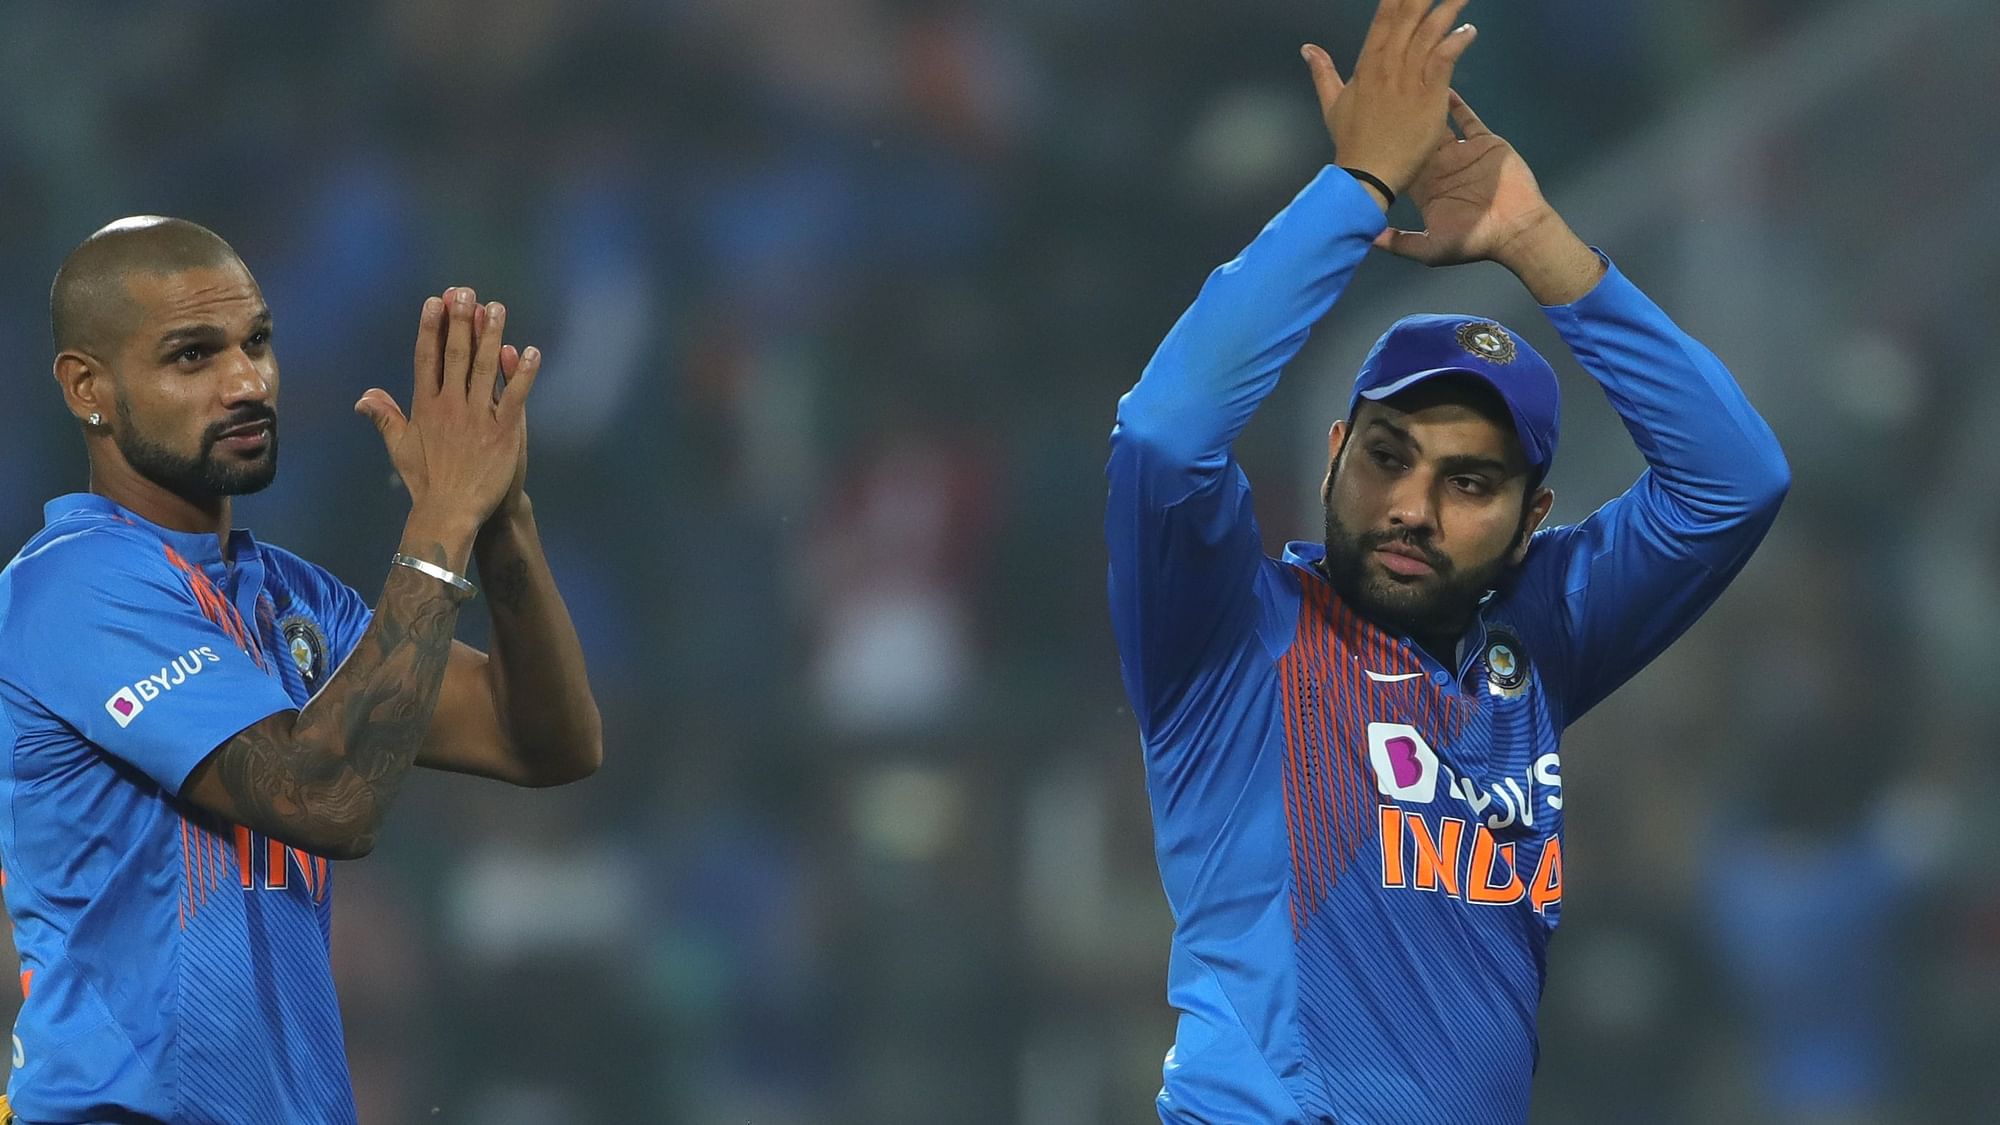 Rohit Sharma and Shikhar Dhawan applaud the stands after winning the T20I series against Bangladesh on Sunday.